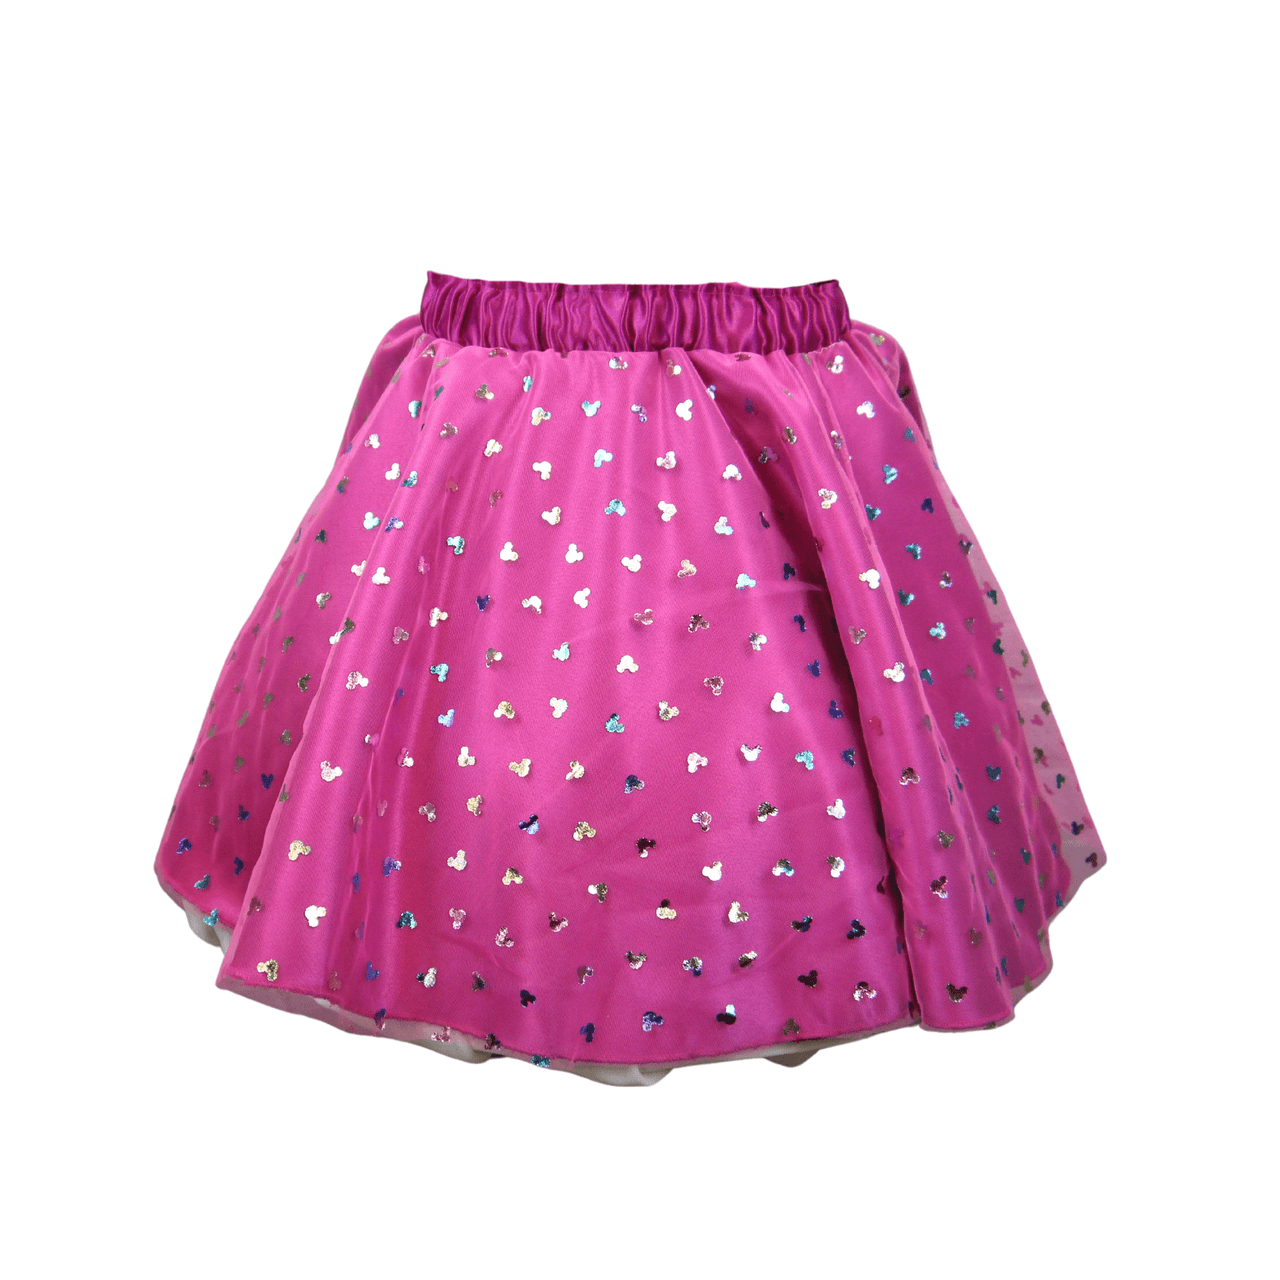 Mouse Royalty Pink Skirt